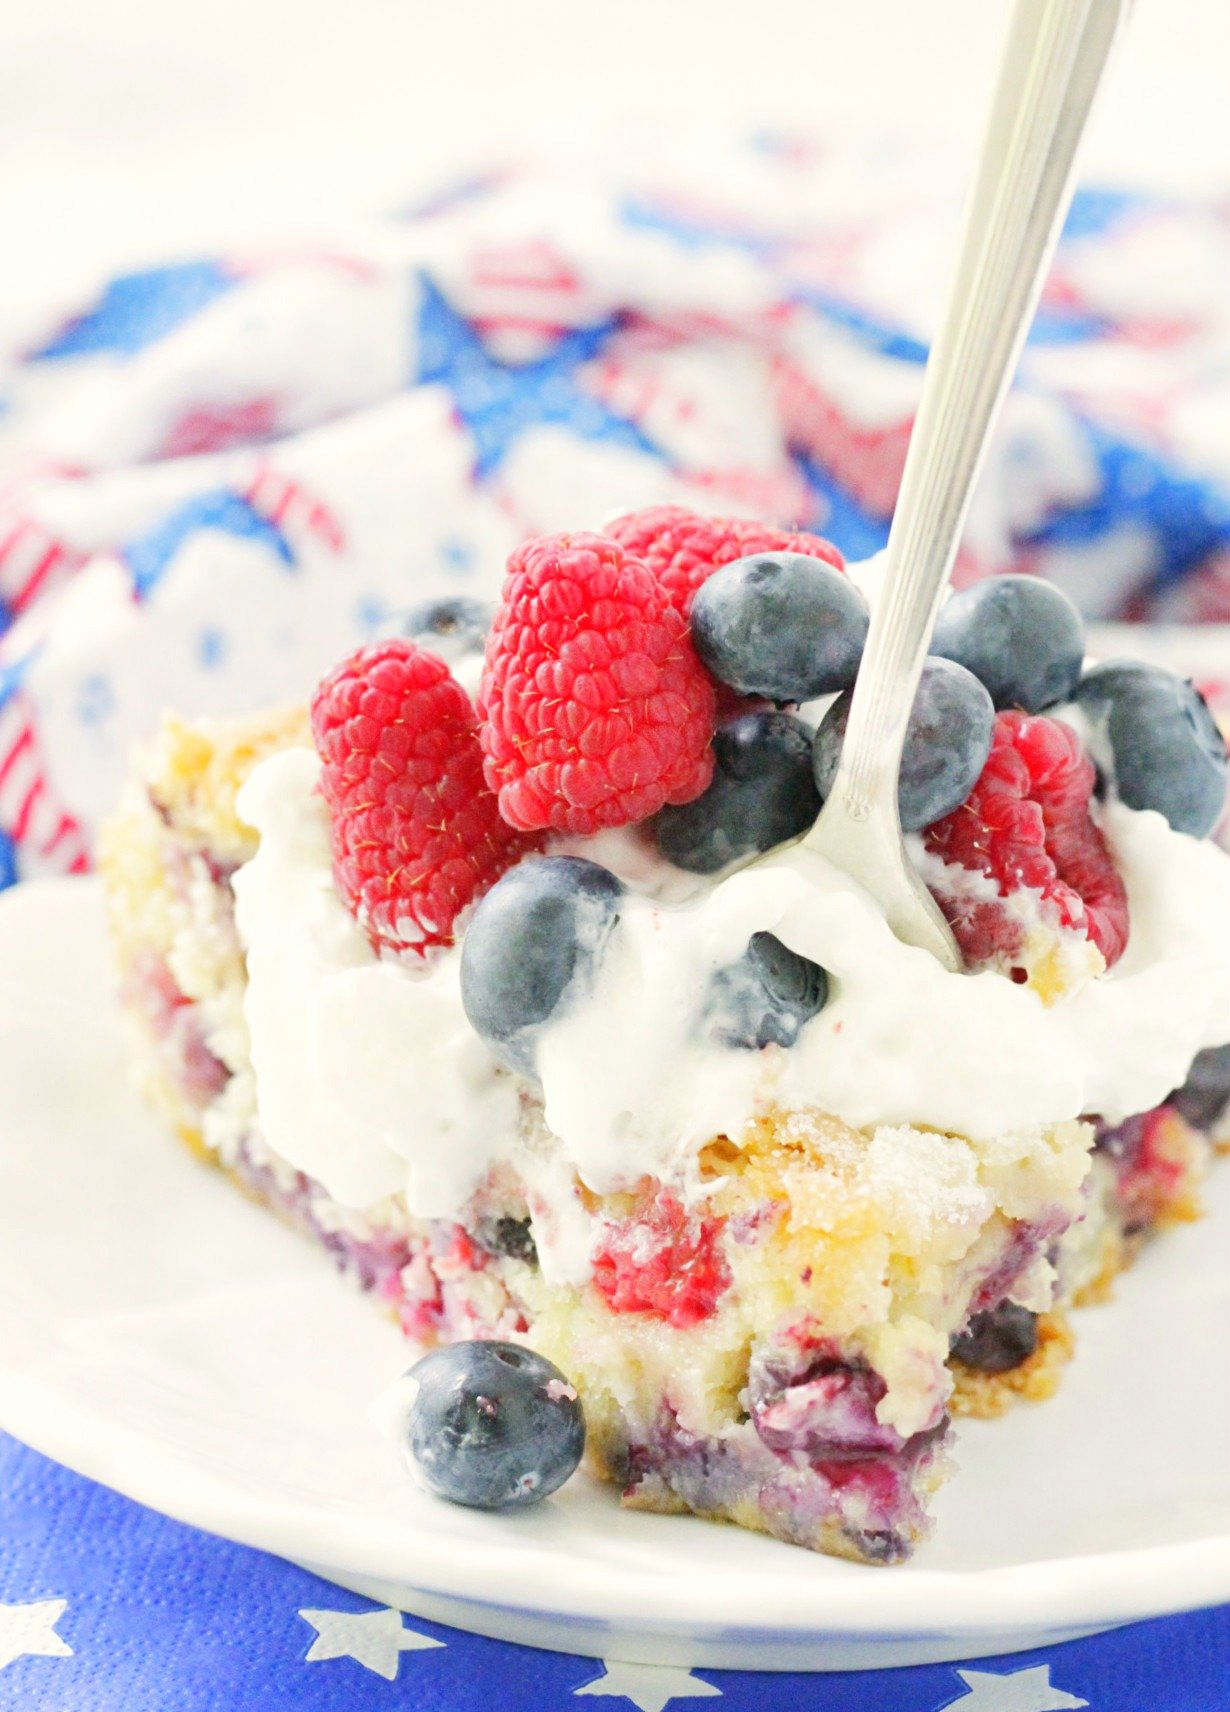 front view of slice of red white and blue berry cake on plate